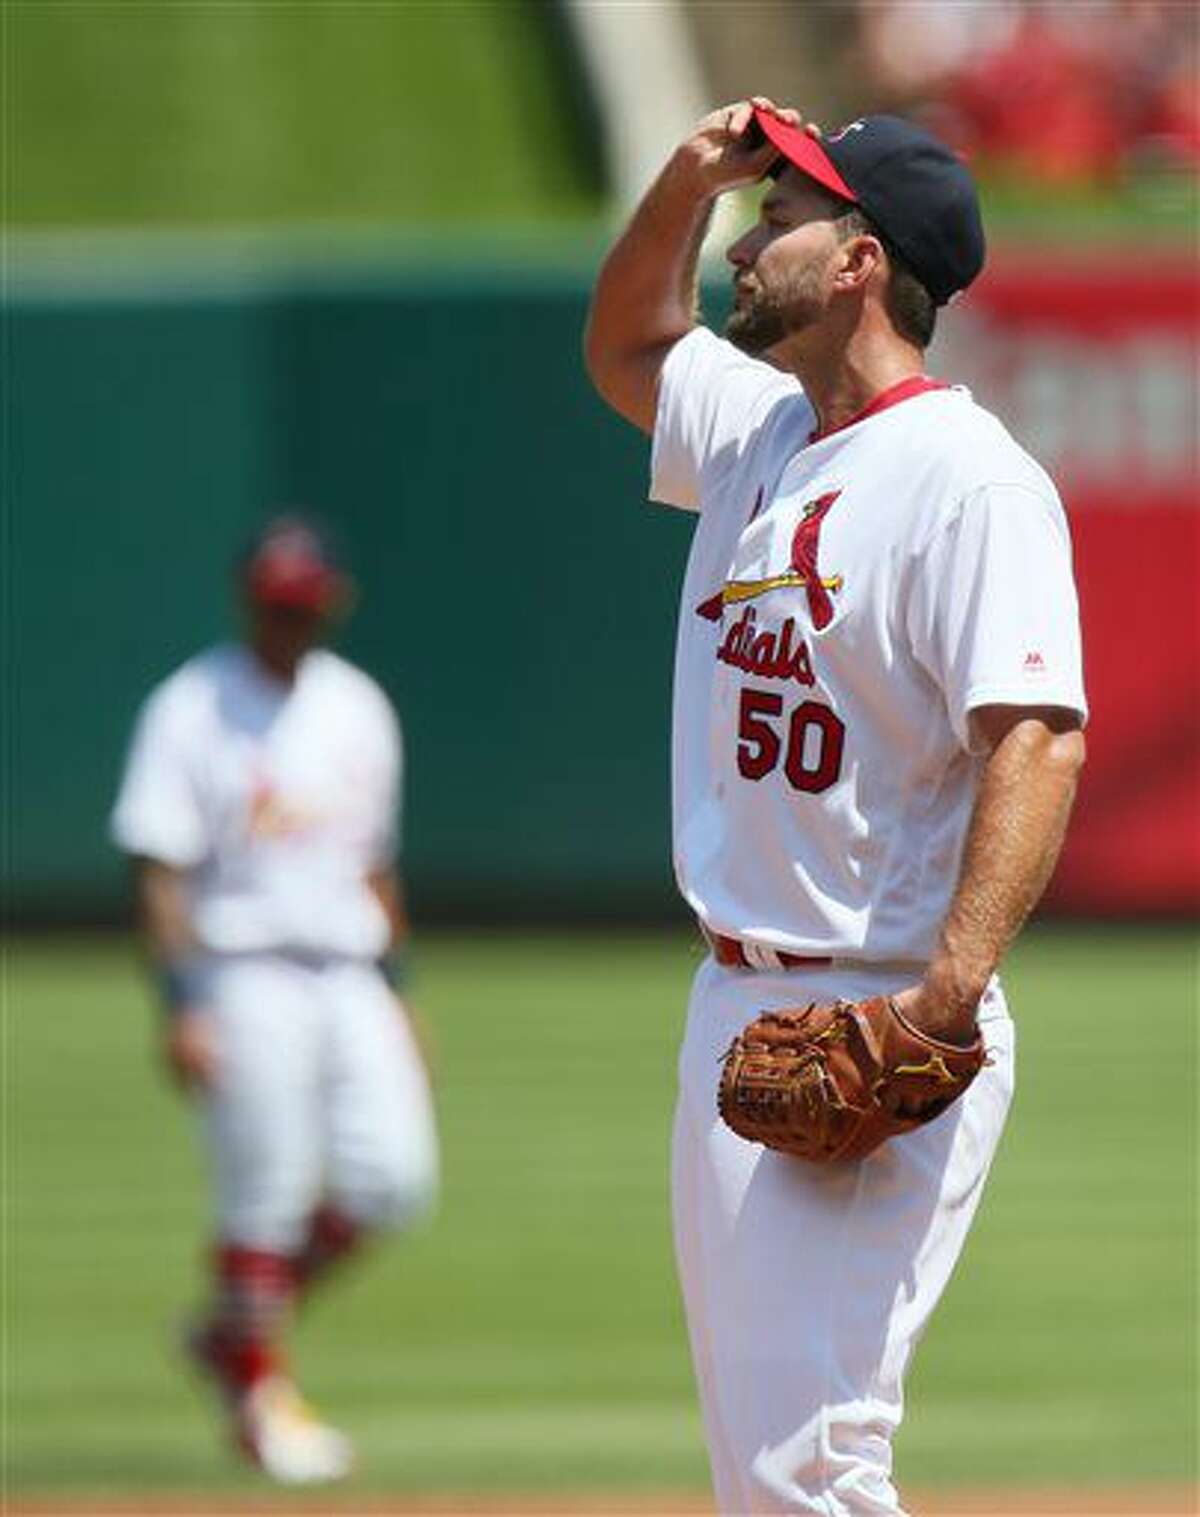 St. Louis Cardinals starting pitcher Adam Wainwright reacts after allowing a two-run single to Atlanta Braves' Nick Markakis in the first inning of a baseball game against the Atlanta Braves on Sunday, Aug. 7, 2016, in St. Louis. (Chris Lee/St. Louis Post-Dispatch via AP)